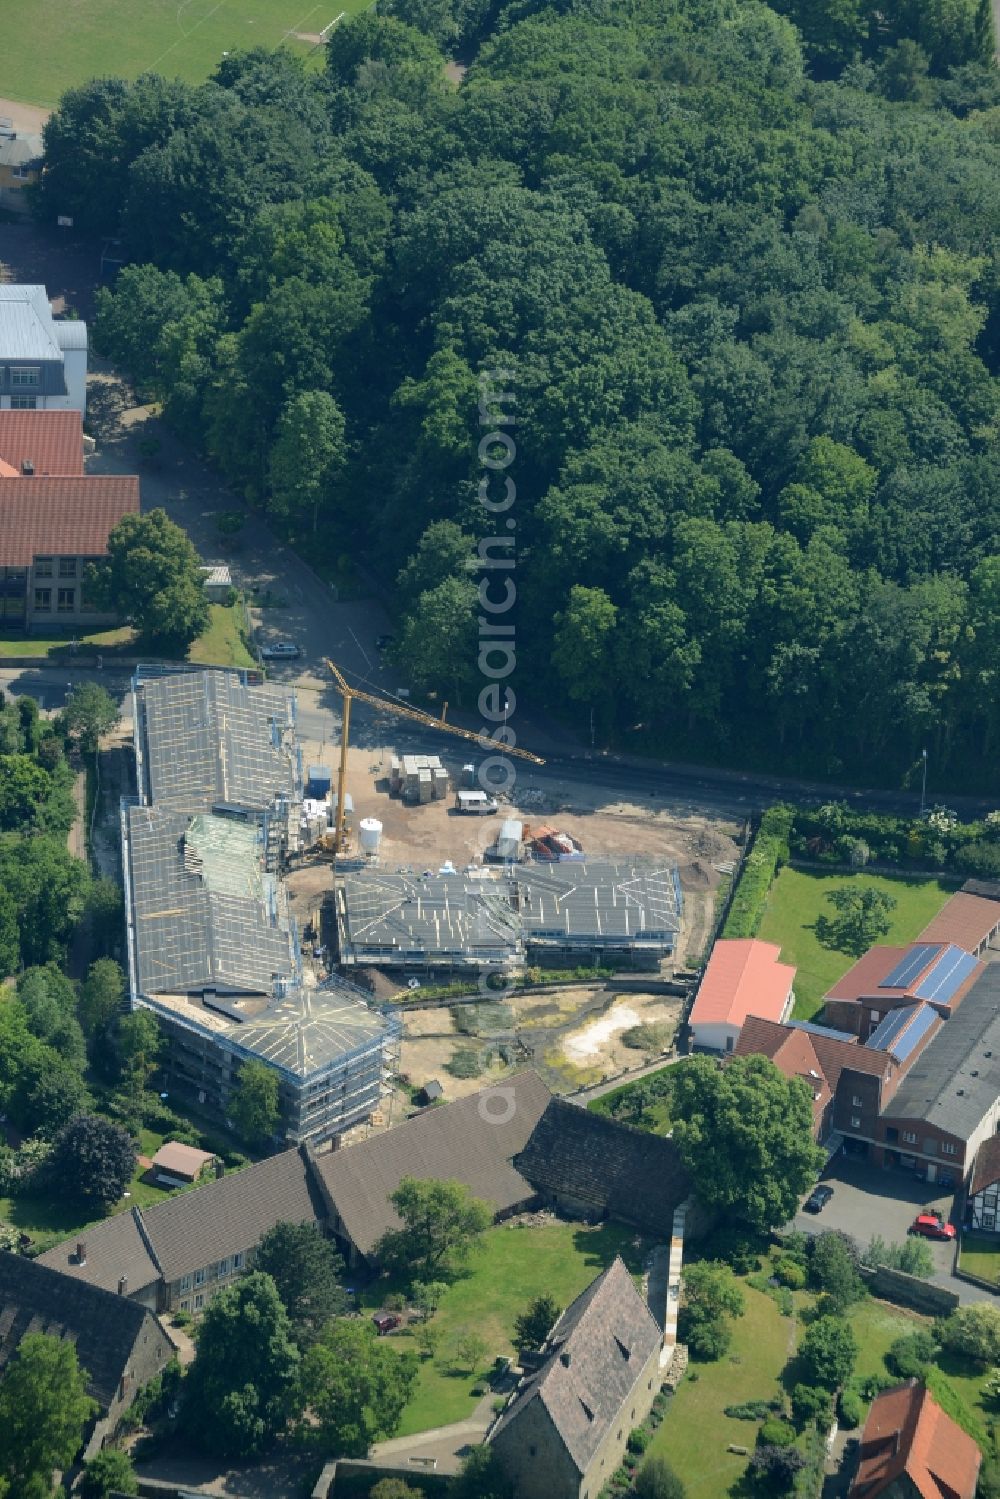 Obernkirchen from above - Construction site for the new building of a complex of the elderly care facilities Sonnenhof in Obernkirchen in the state of Lower Saxony